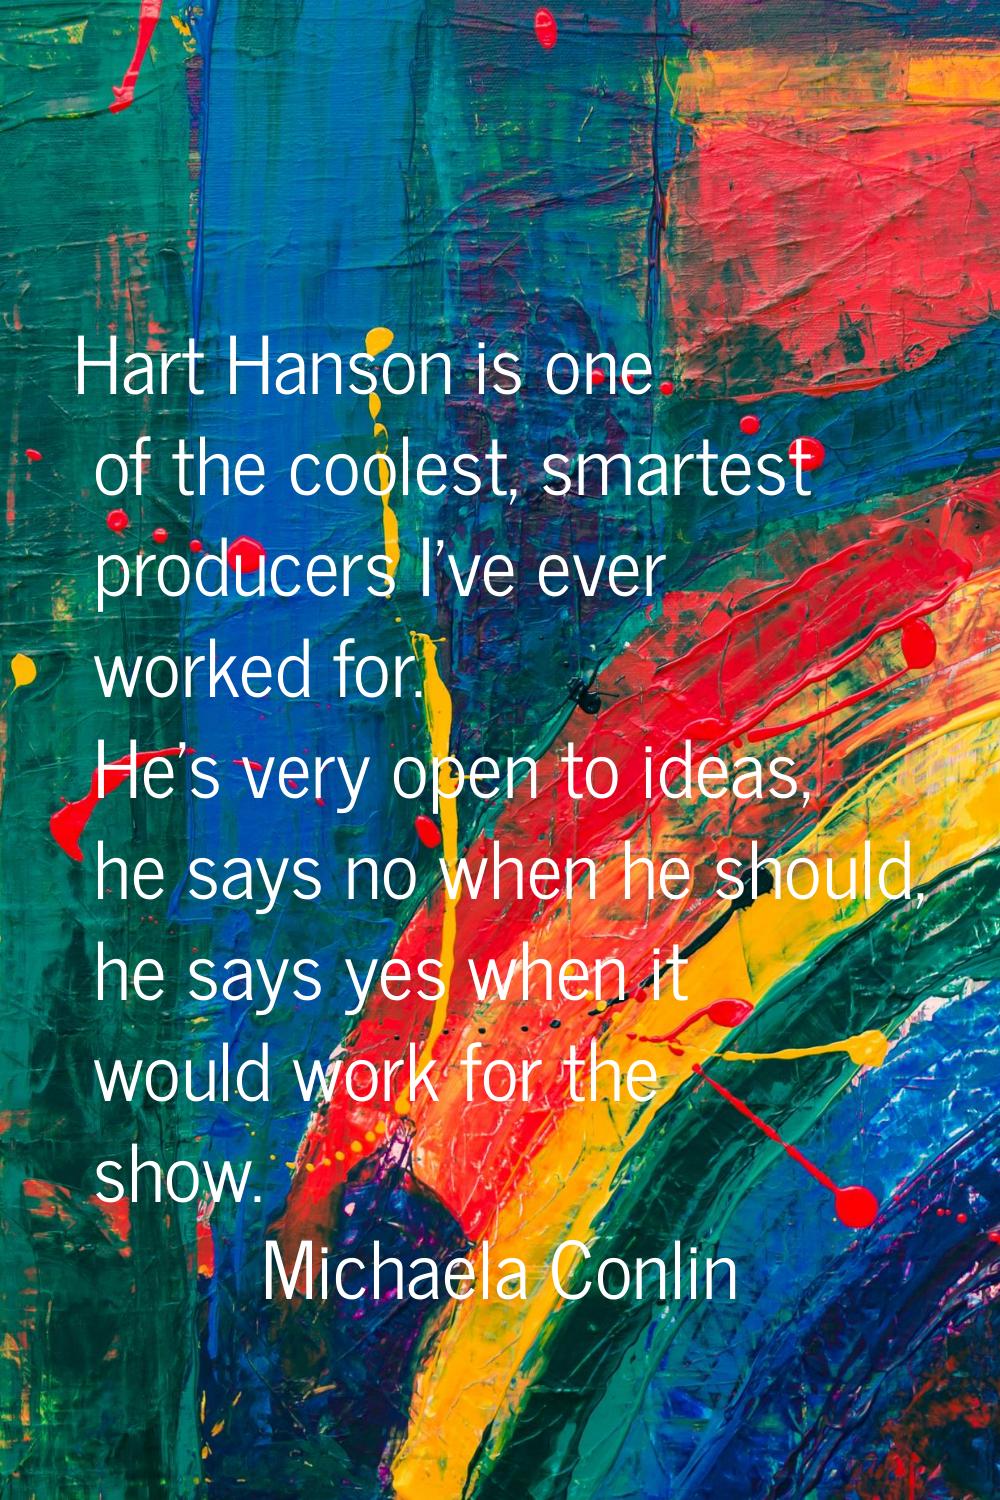 Hart Hanson is one of the coolest, smartest producers I've ever worked for. He's very open to ideas